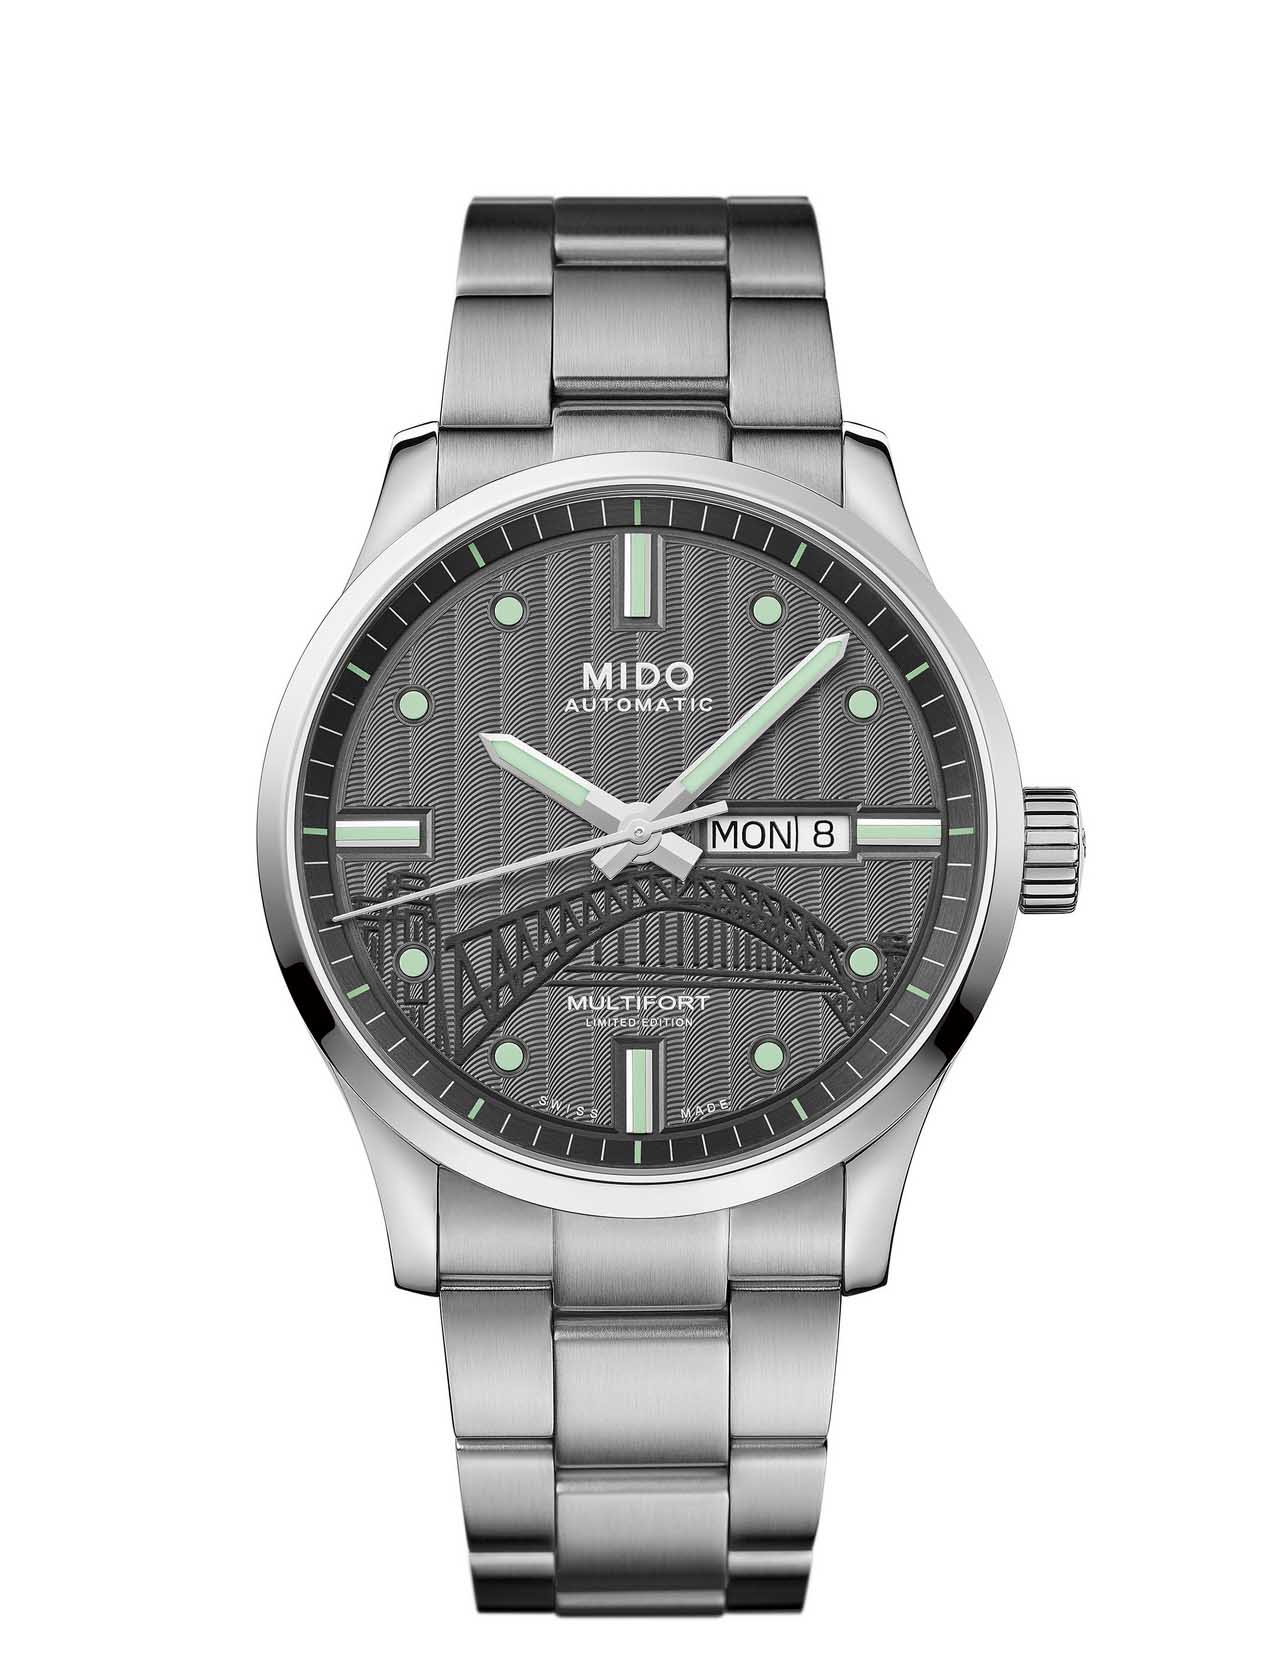 Mido Multifort 20th Anniversary Inspired by Architecture